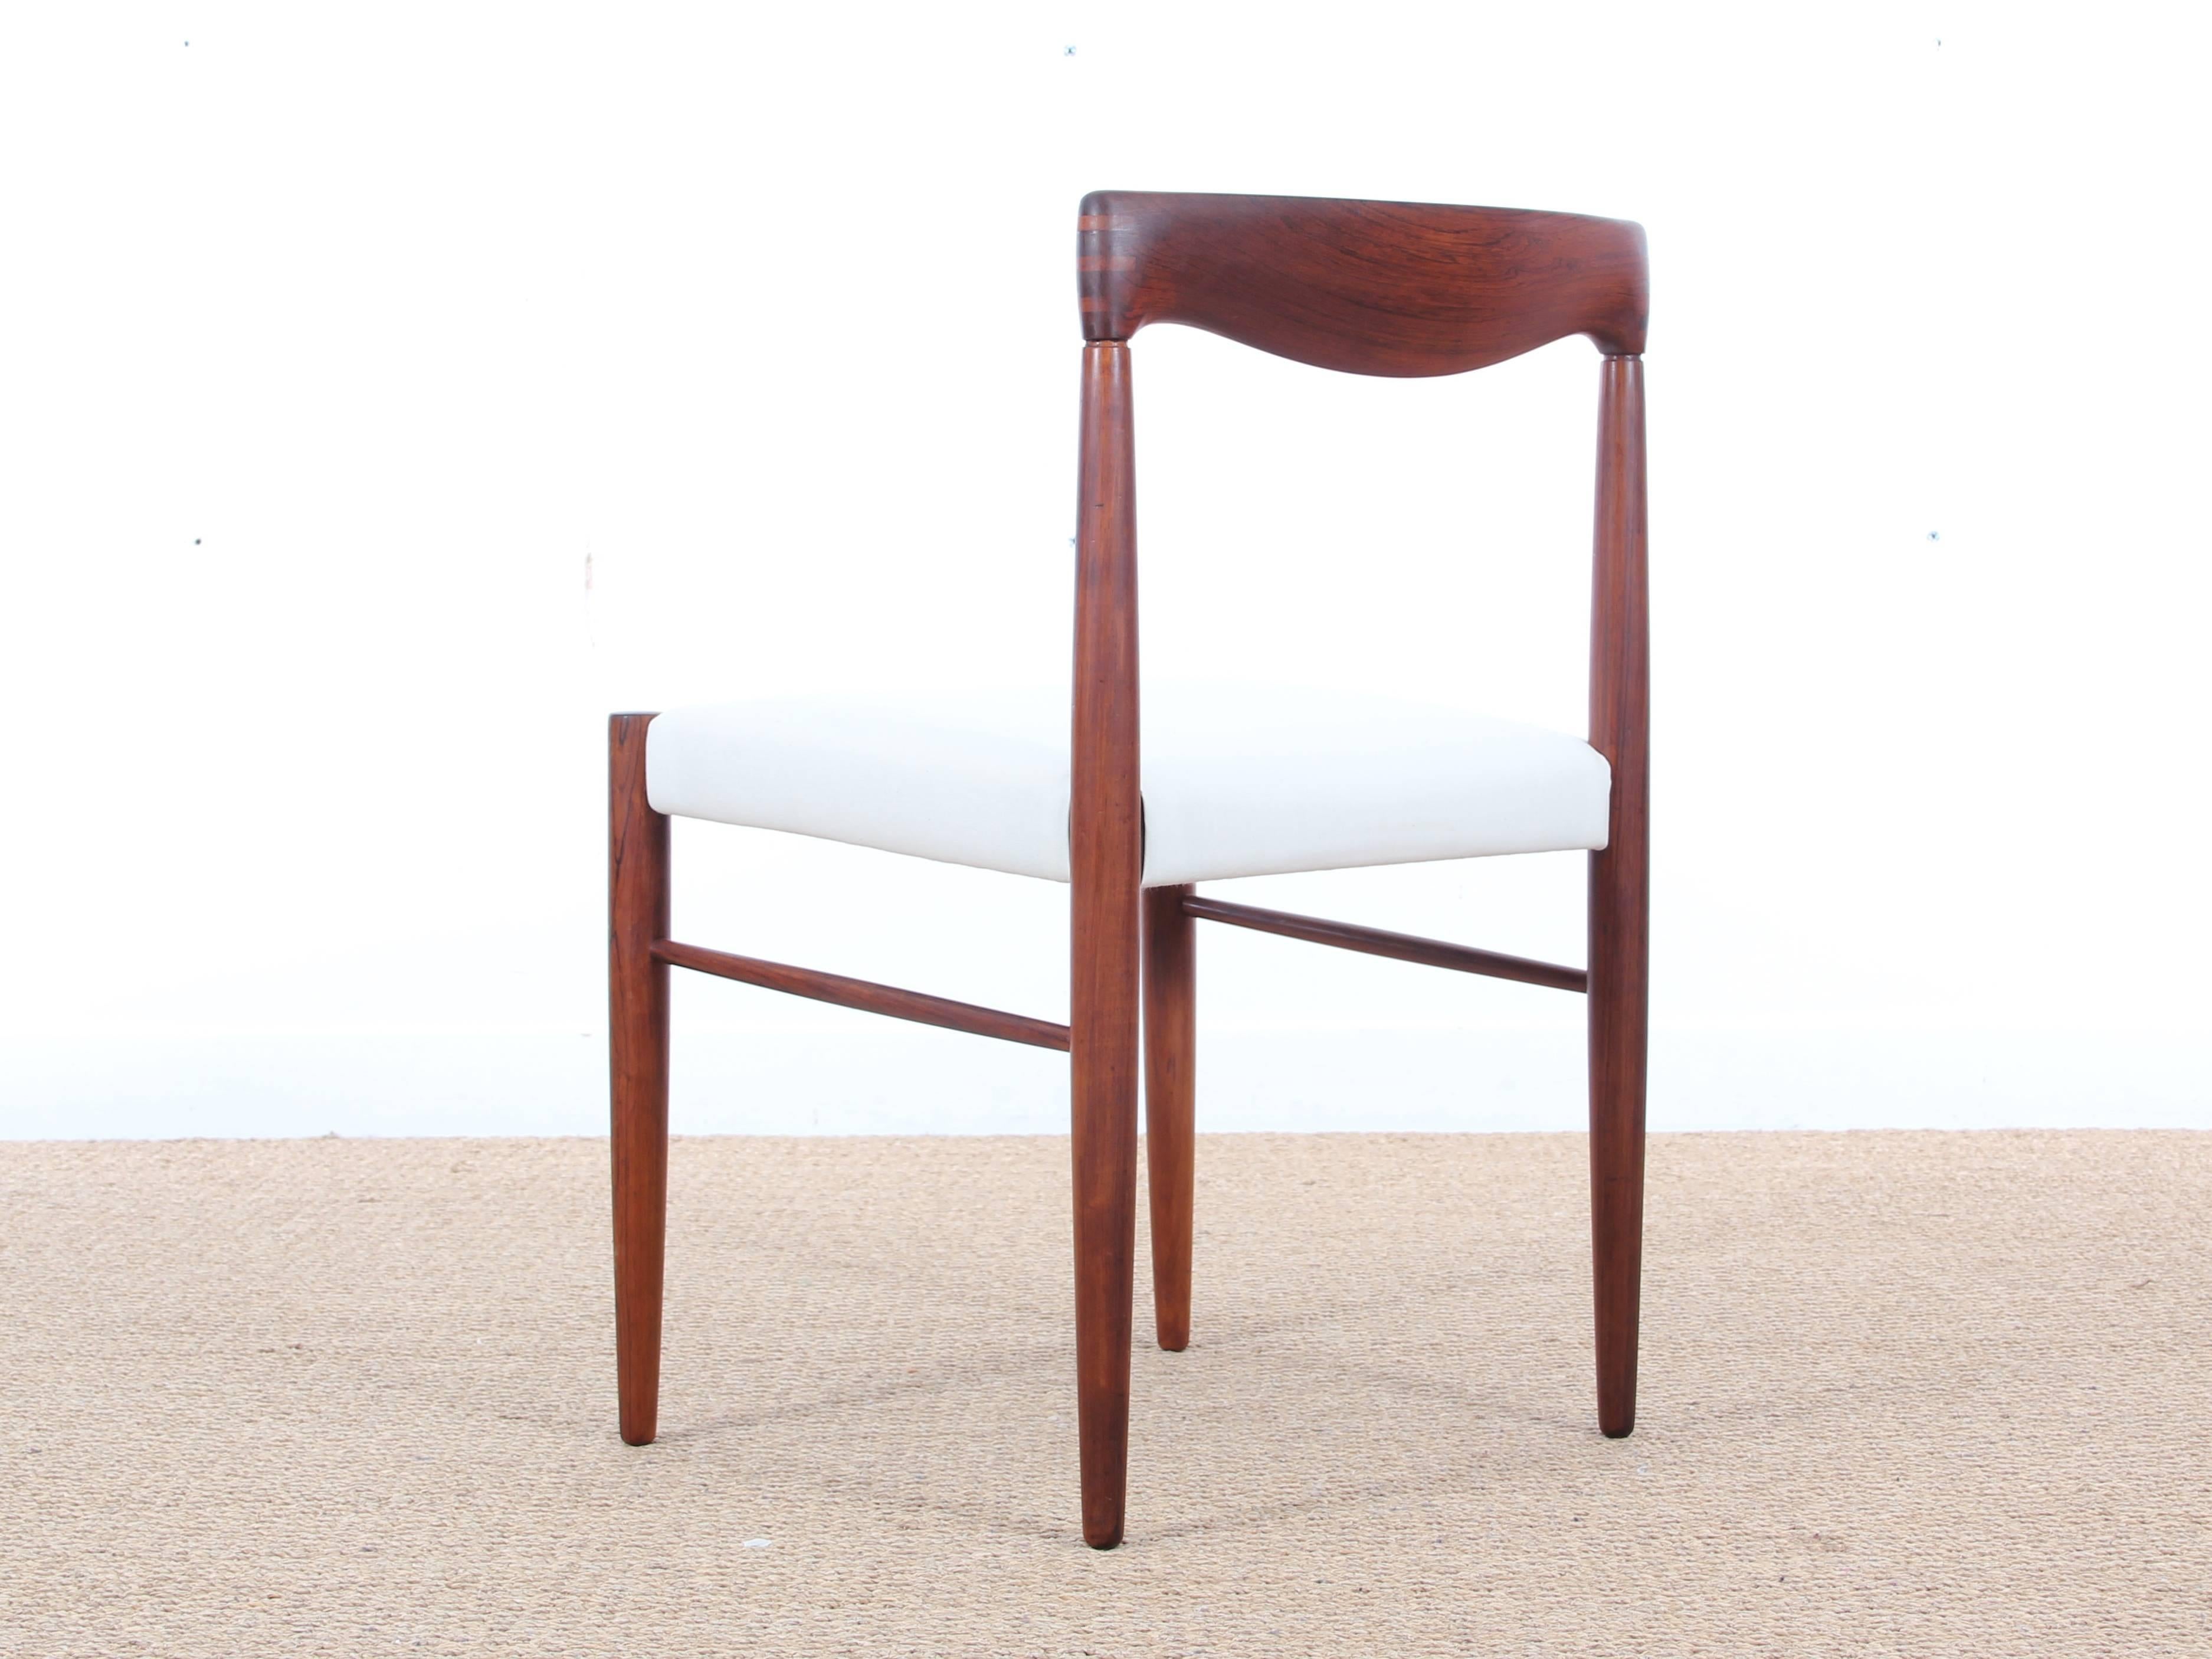 Mid-20th Century Danish Mid-Century Modern Set of Four Chairs in Rio Rosewood by H. W. Klein